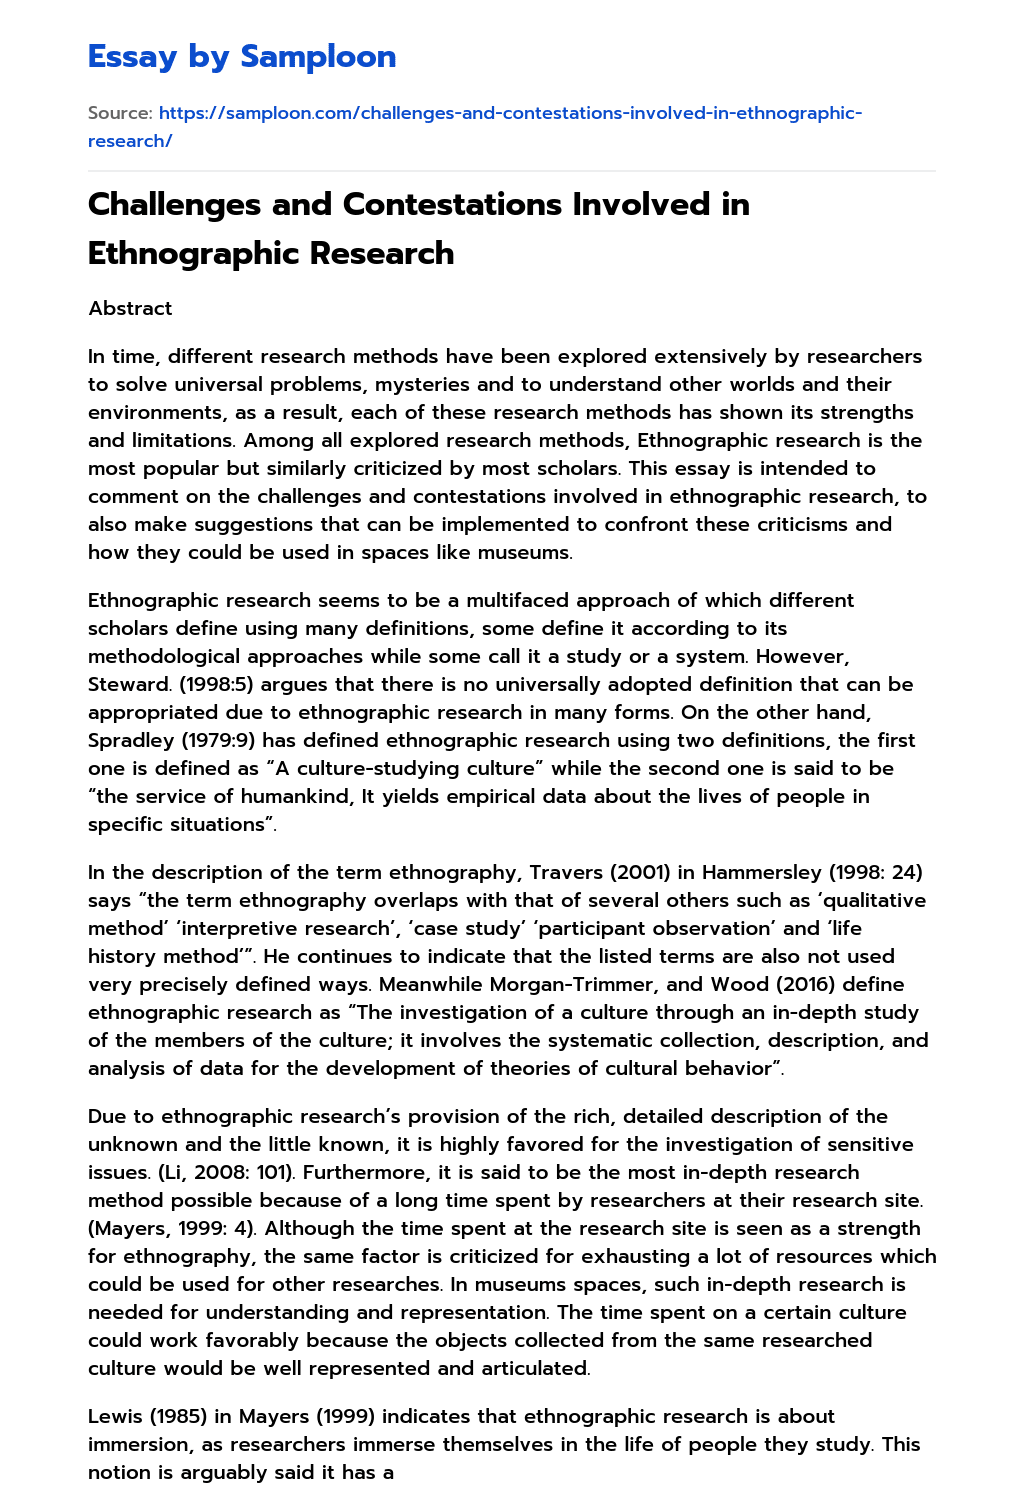 Challenges and Contestations Involved in Ethnographic Research essay